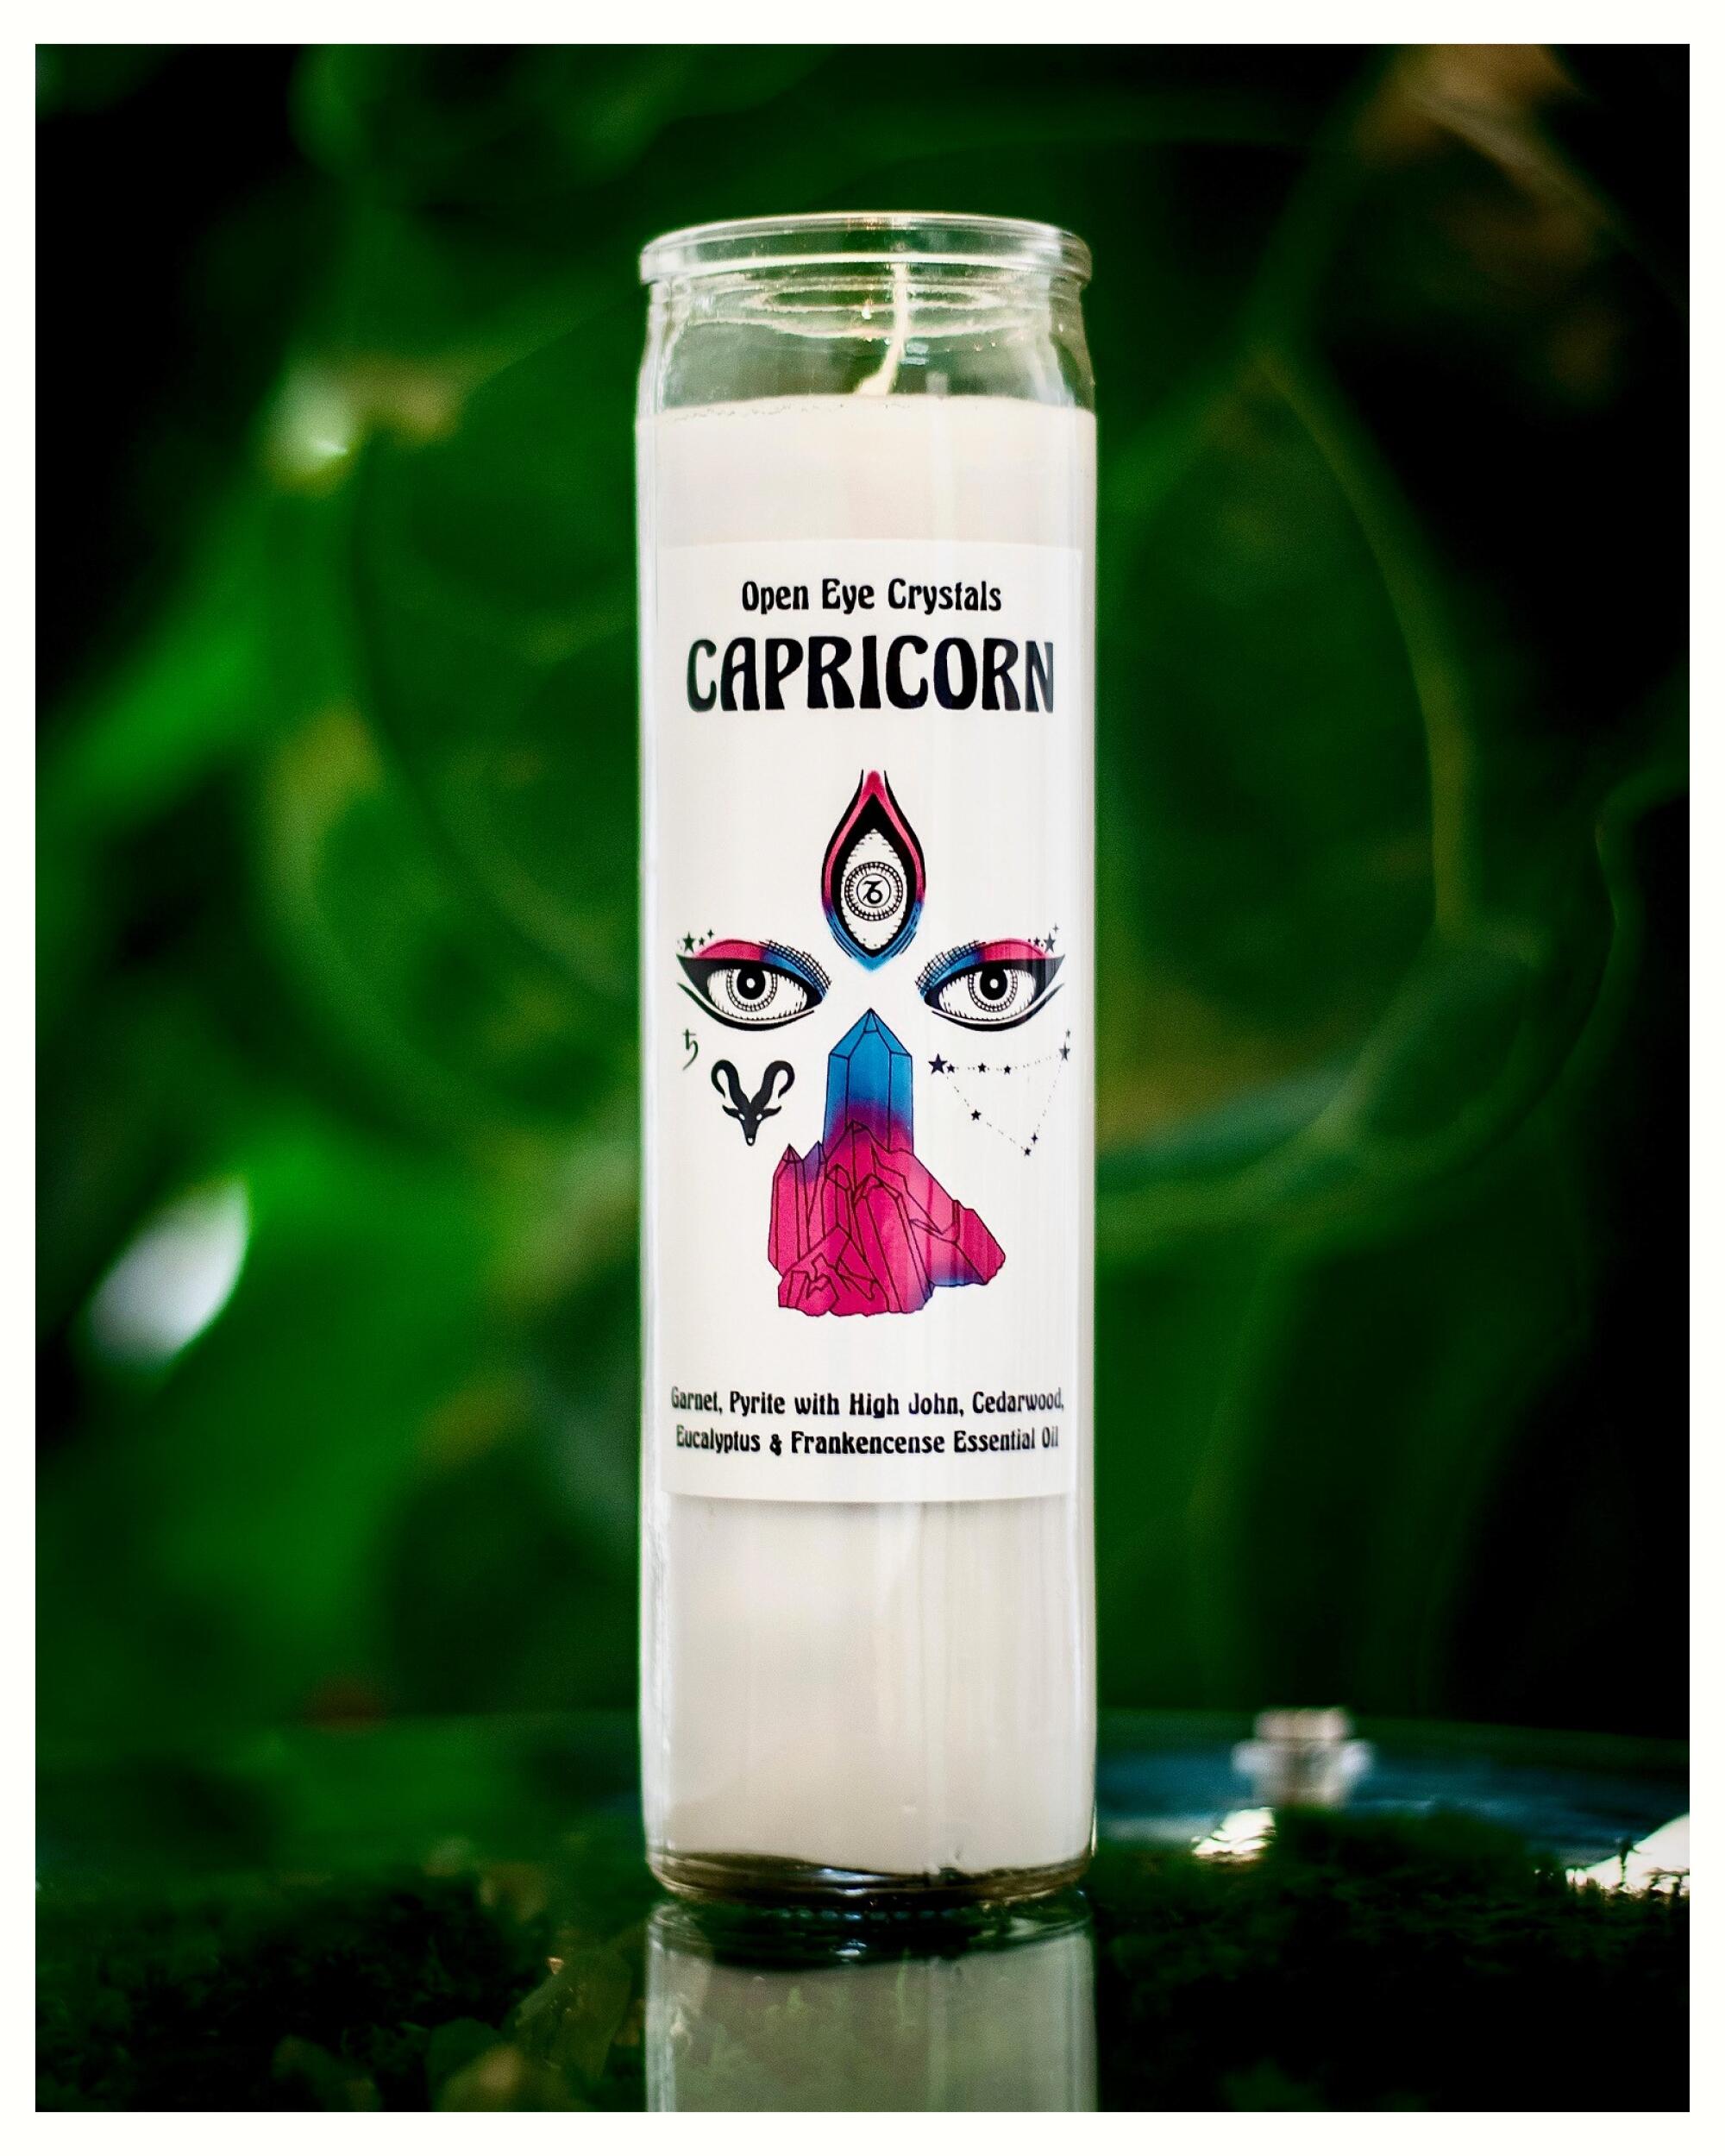 A Capricorn candle by Open Eye Crystals 